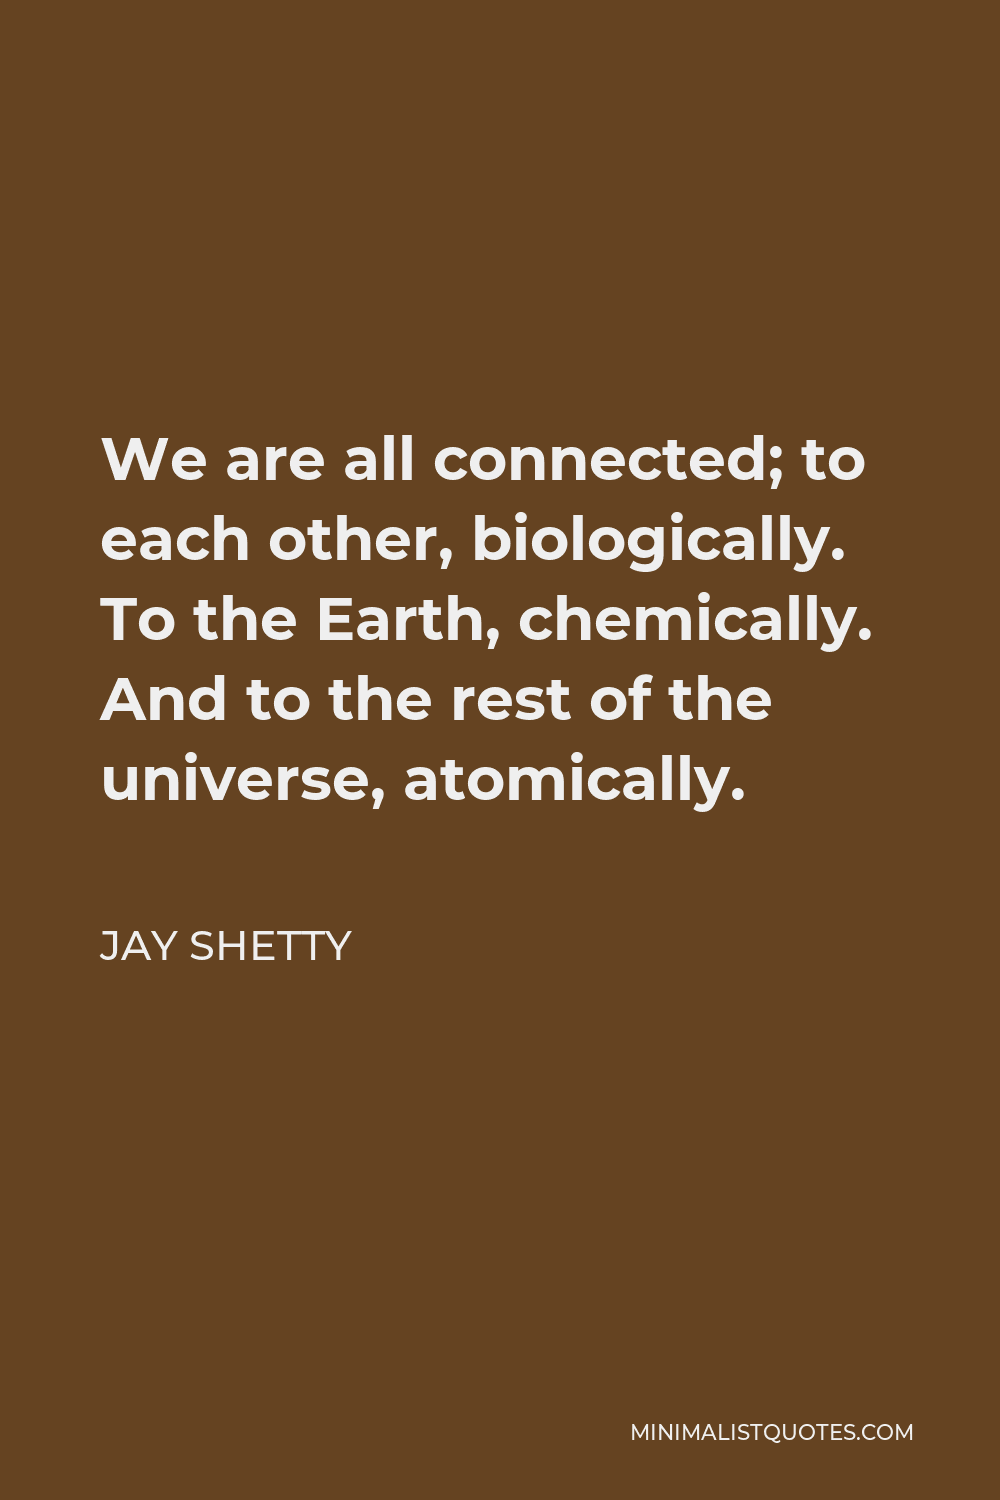 Neil deGrasse Tyson Quote - We are all connected; To each other, biologically. To the earth, chemically. To the rest of the universe atomically.